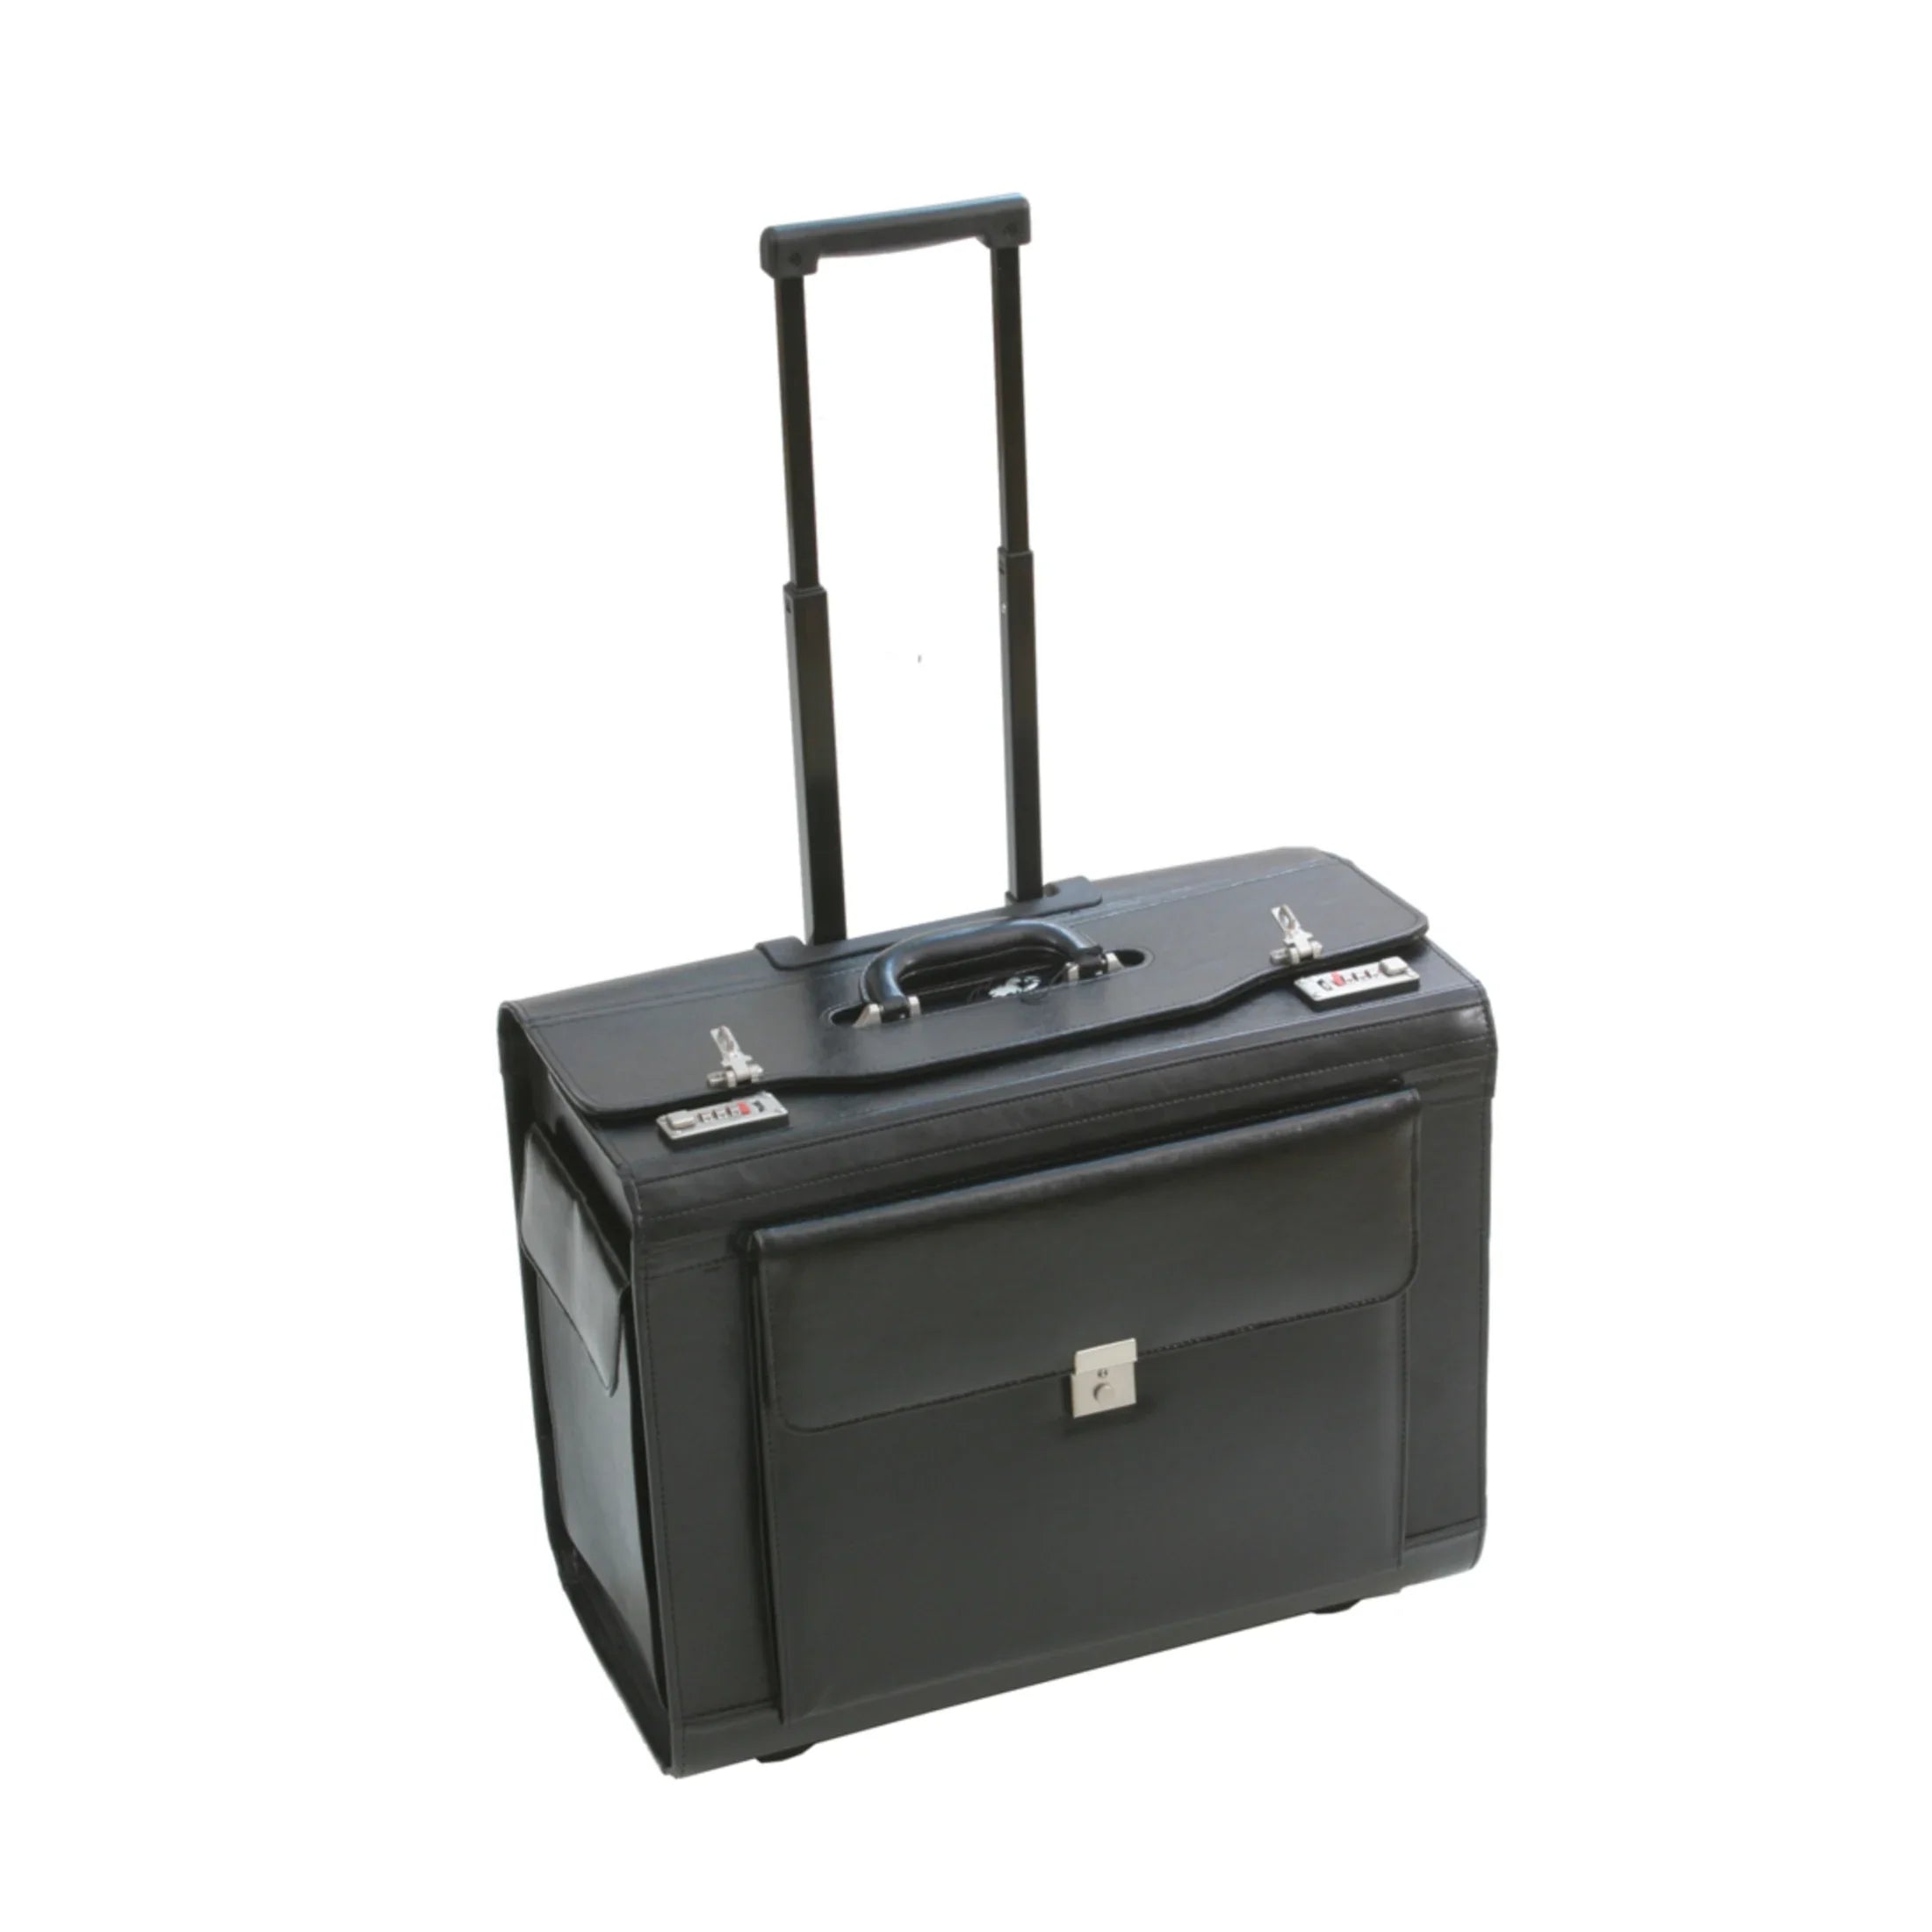 Dermata business pilot case on wheels XL made of leather - black